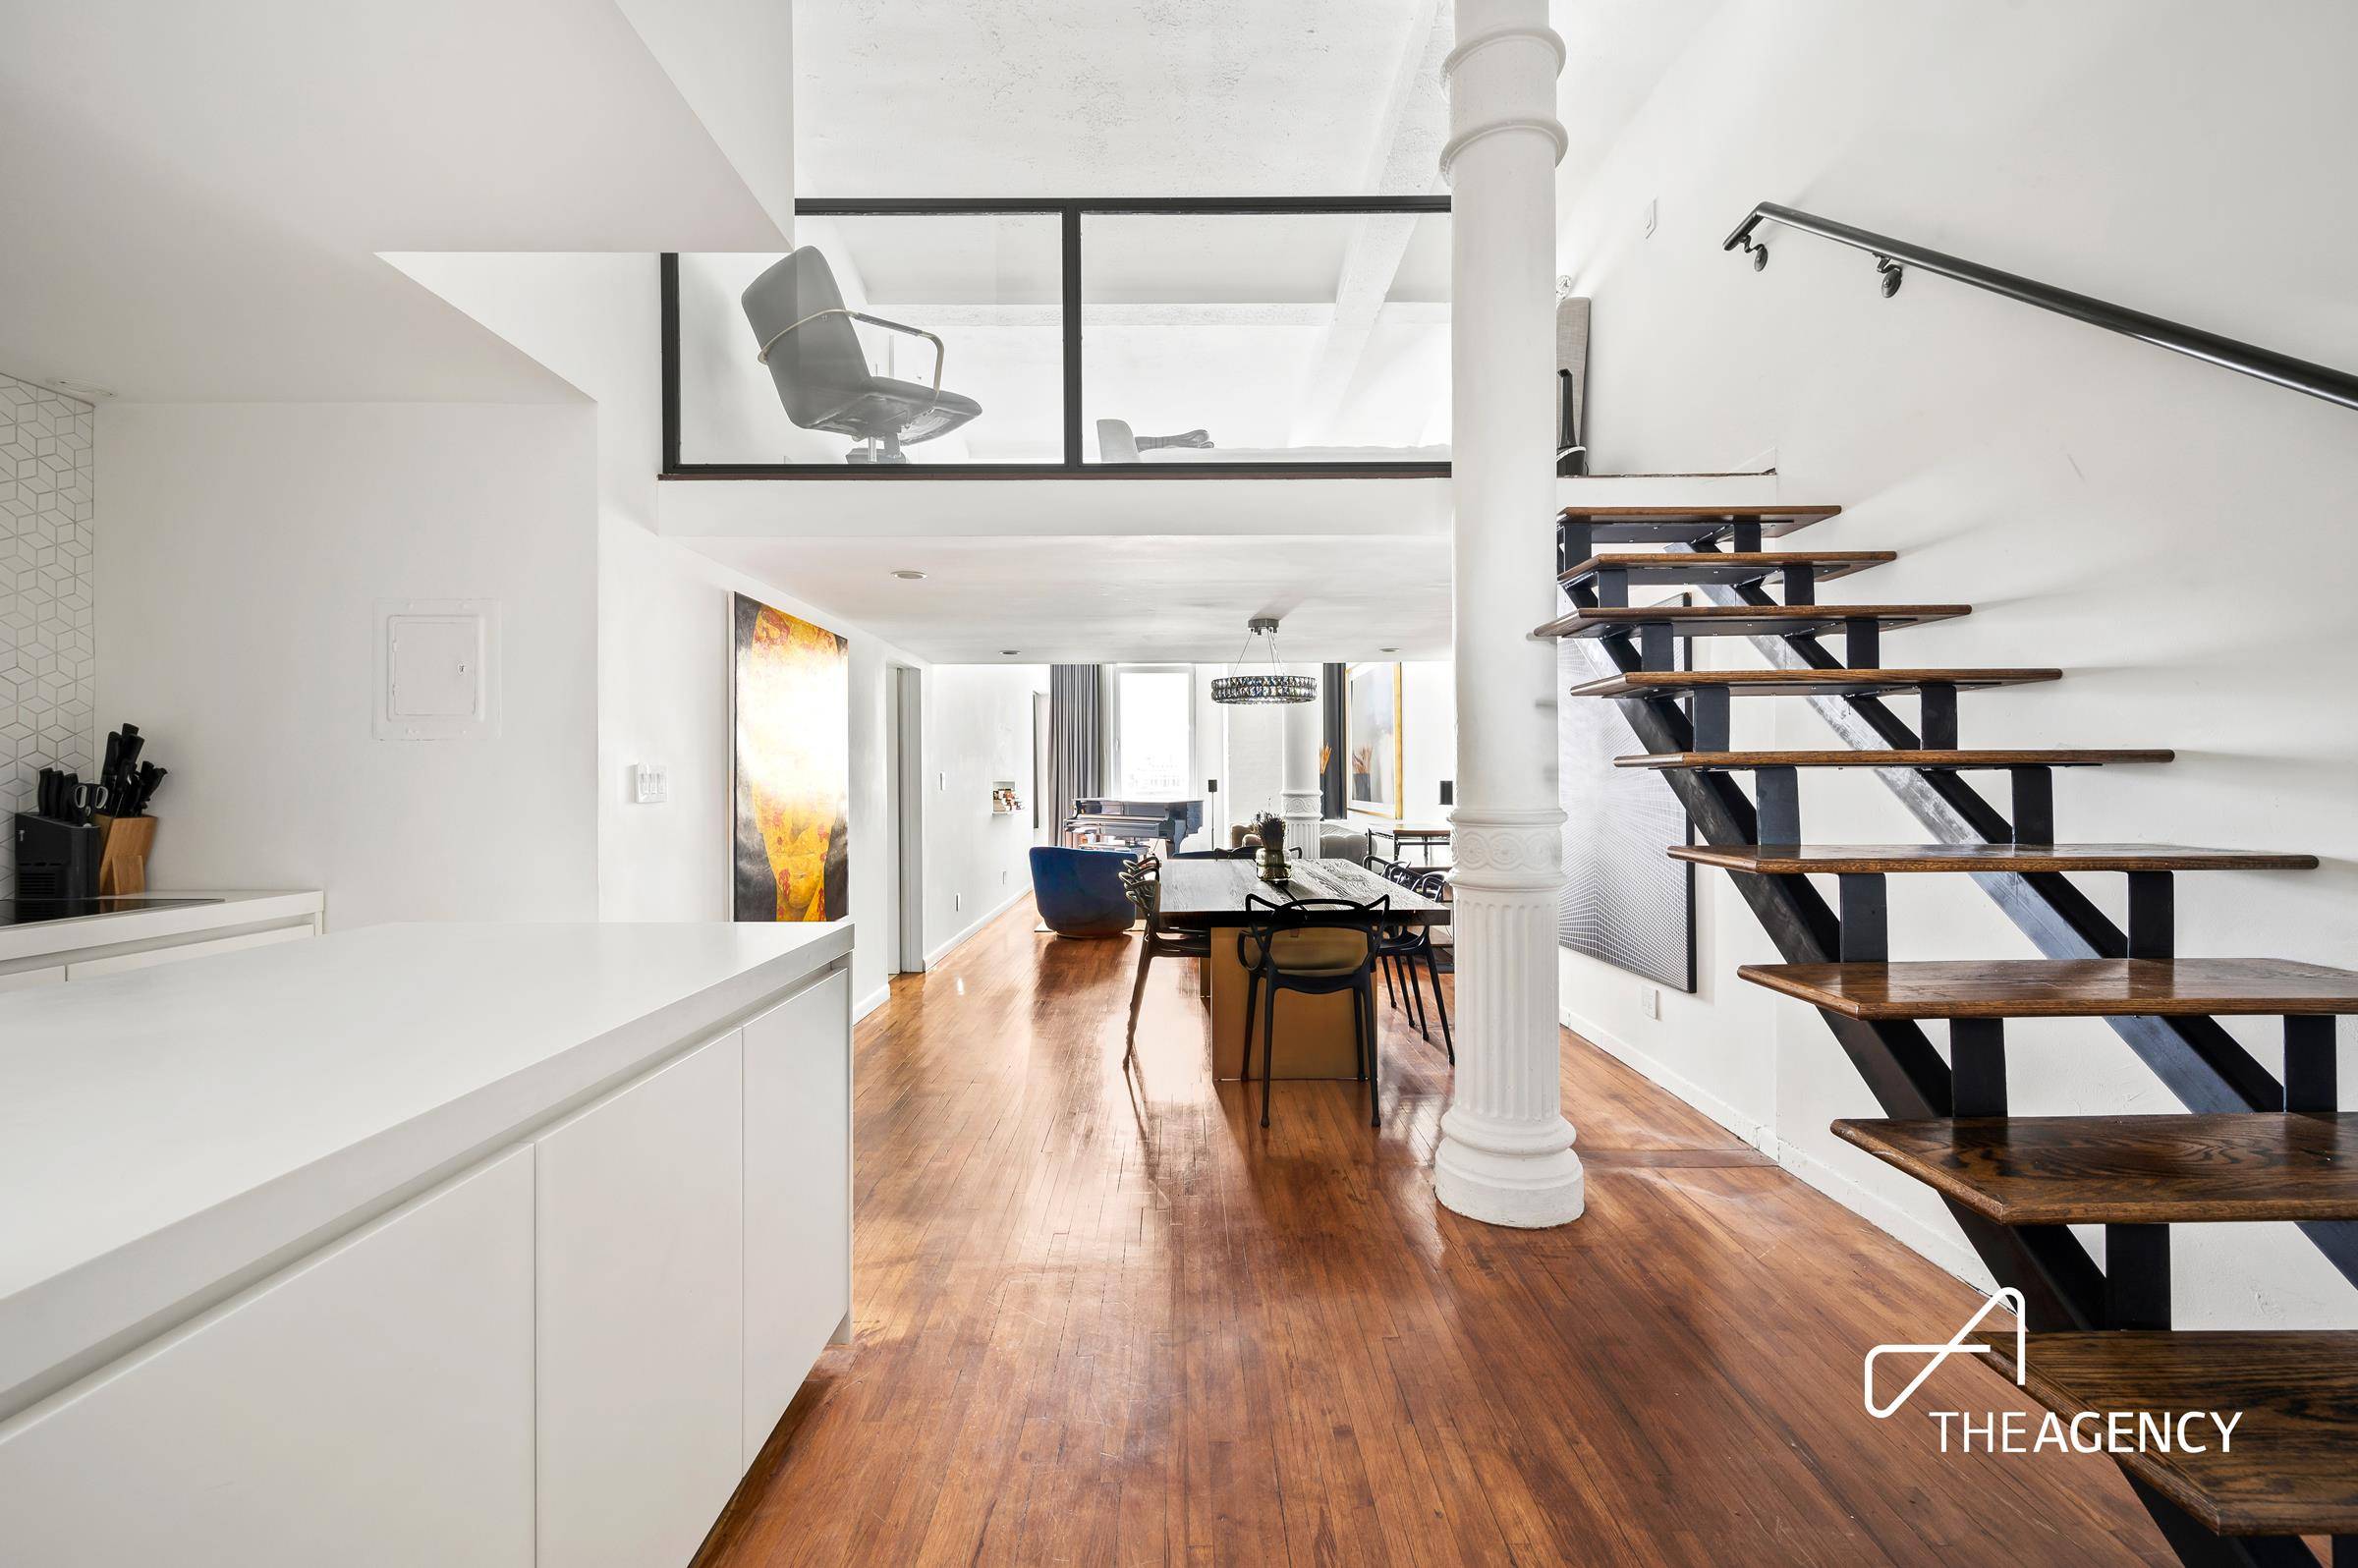 This bright and expansive renovated Greenwich Village loft is now available featuring 13.